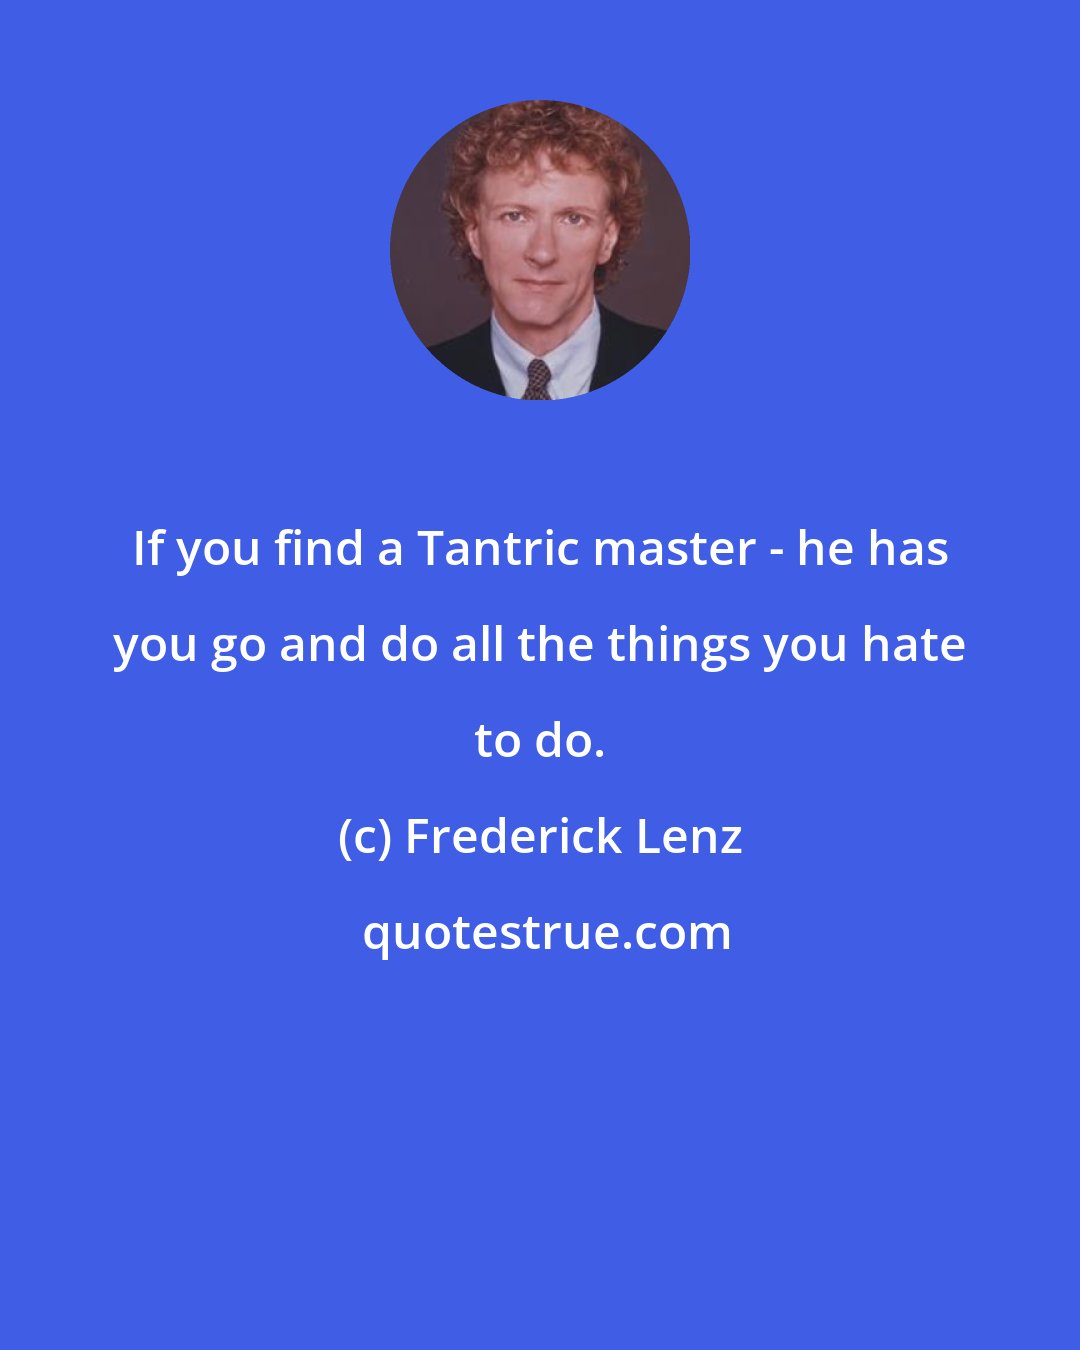 Frederick Lenz: If you find a Tantric master - he has you go and do all the things you hate to do.